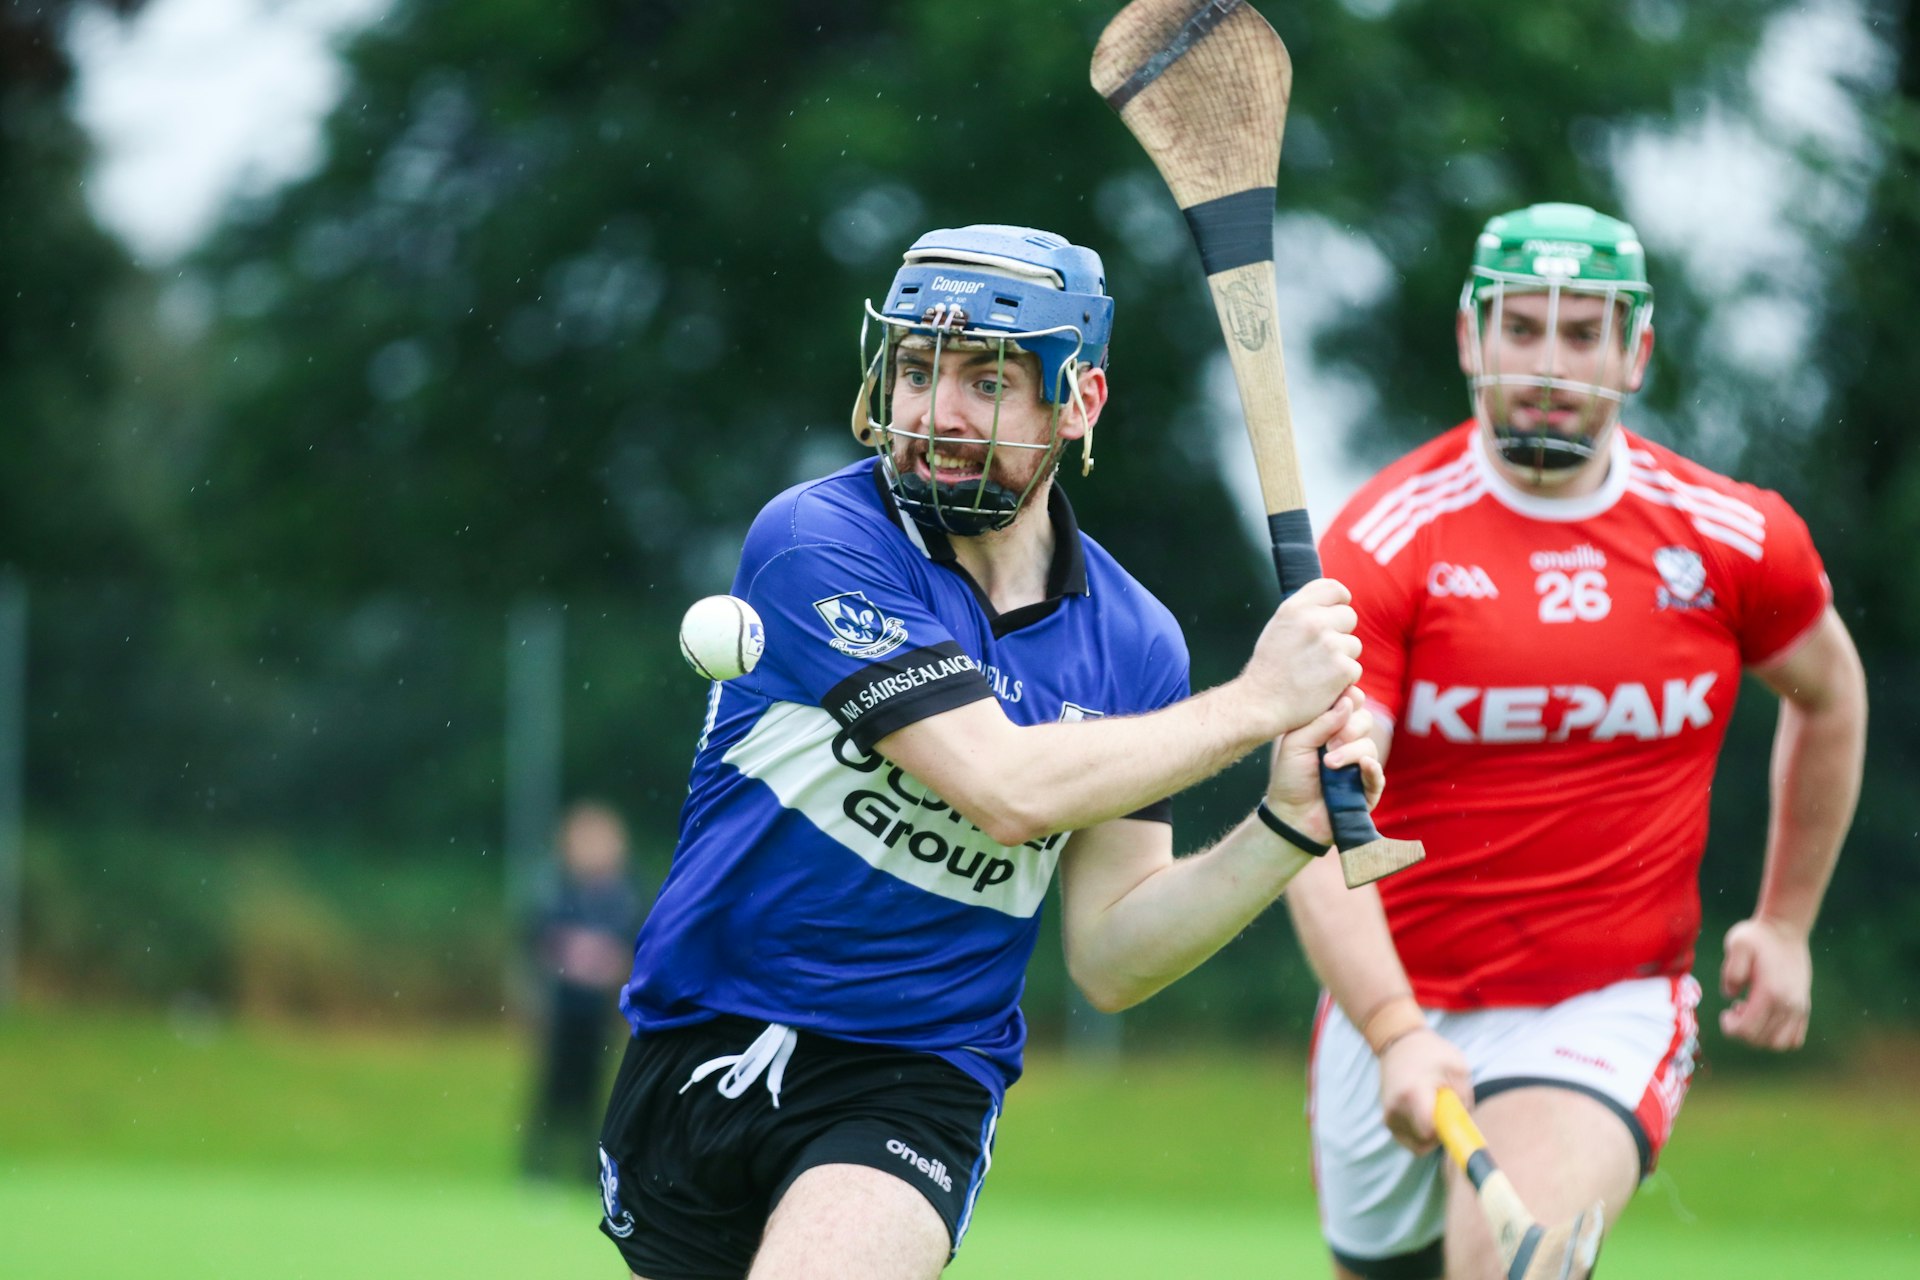 A helmeted hurling player in blue grimaces as he prepares to whack the sliotar